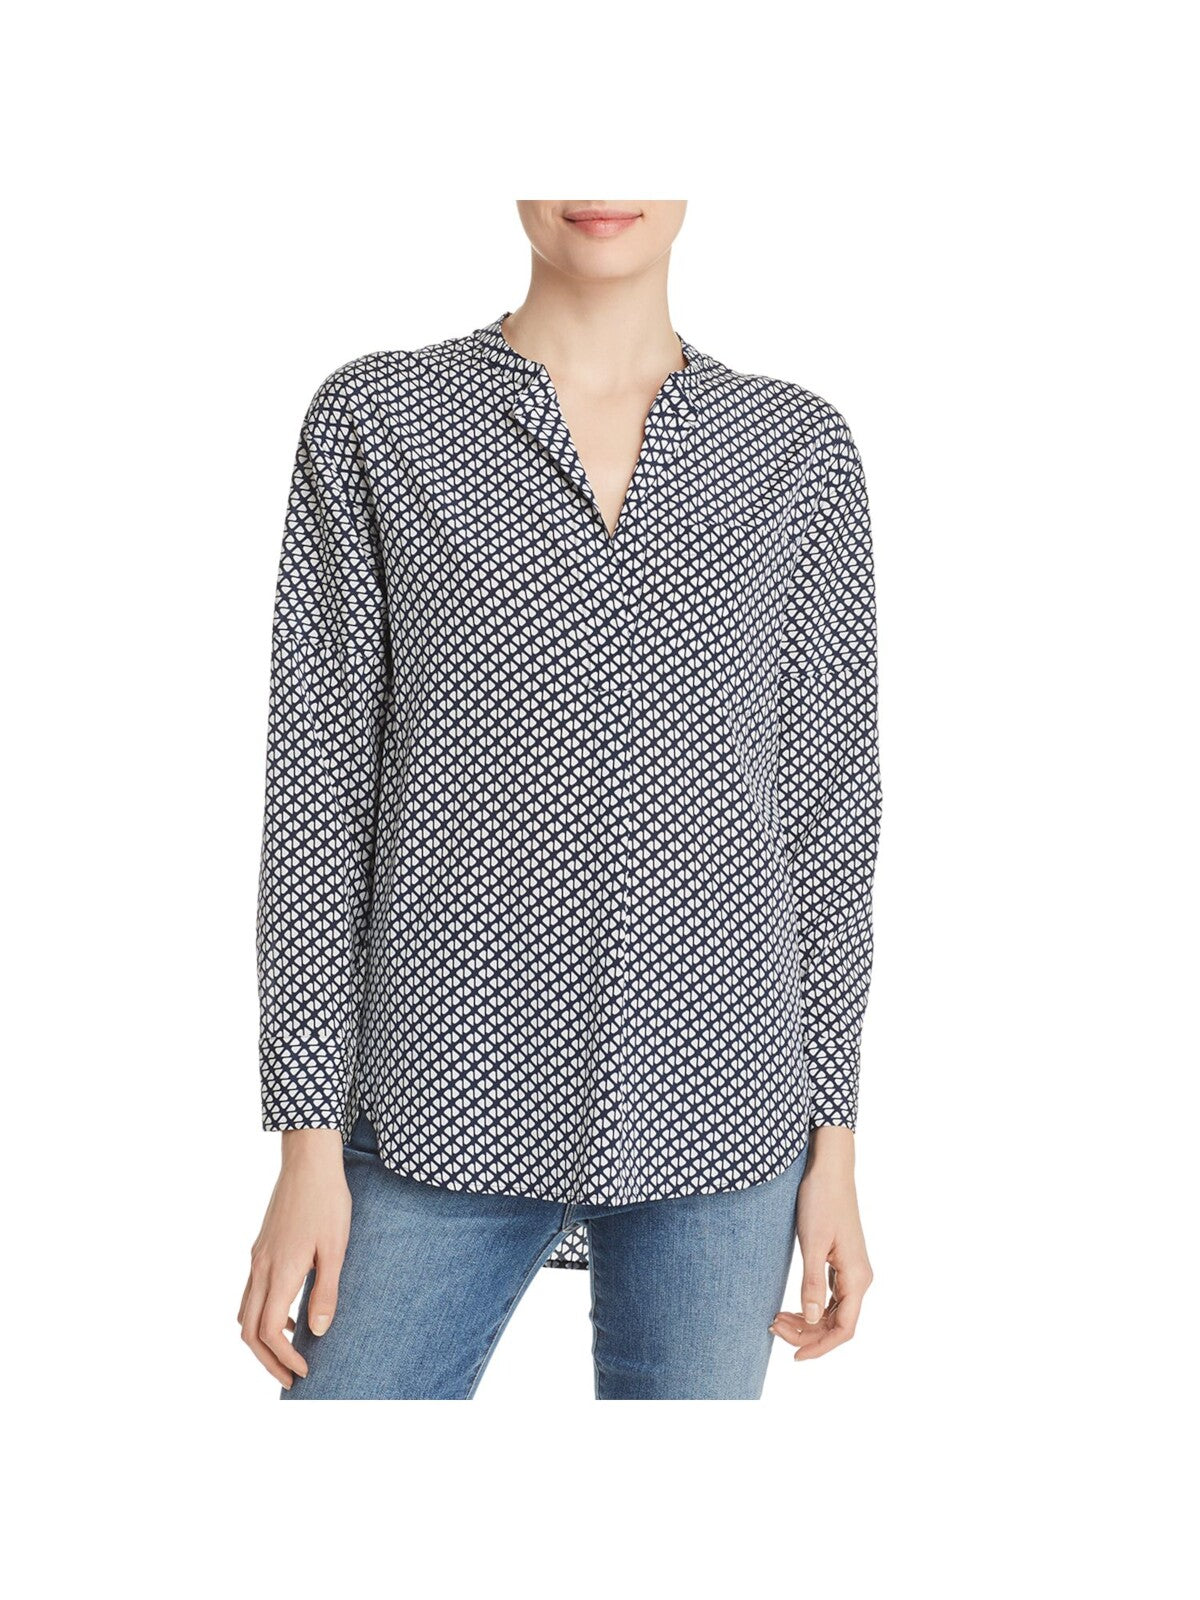 RELATIVE Womens Silk Pocketed Slitted Lightweight Curved Hem Long Sleeve Split Cocktail Button Up Top